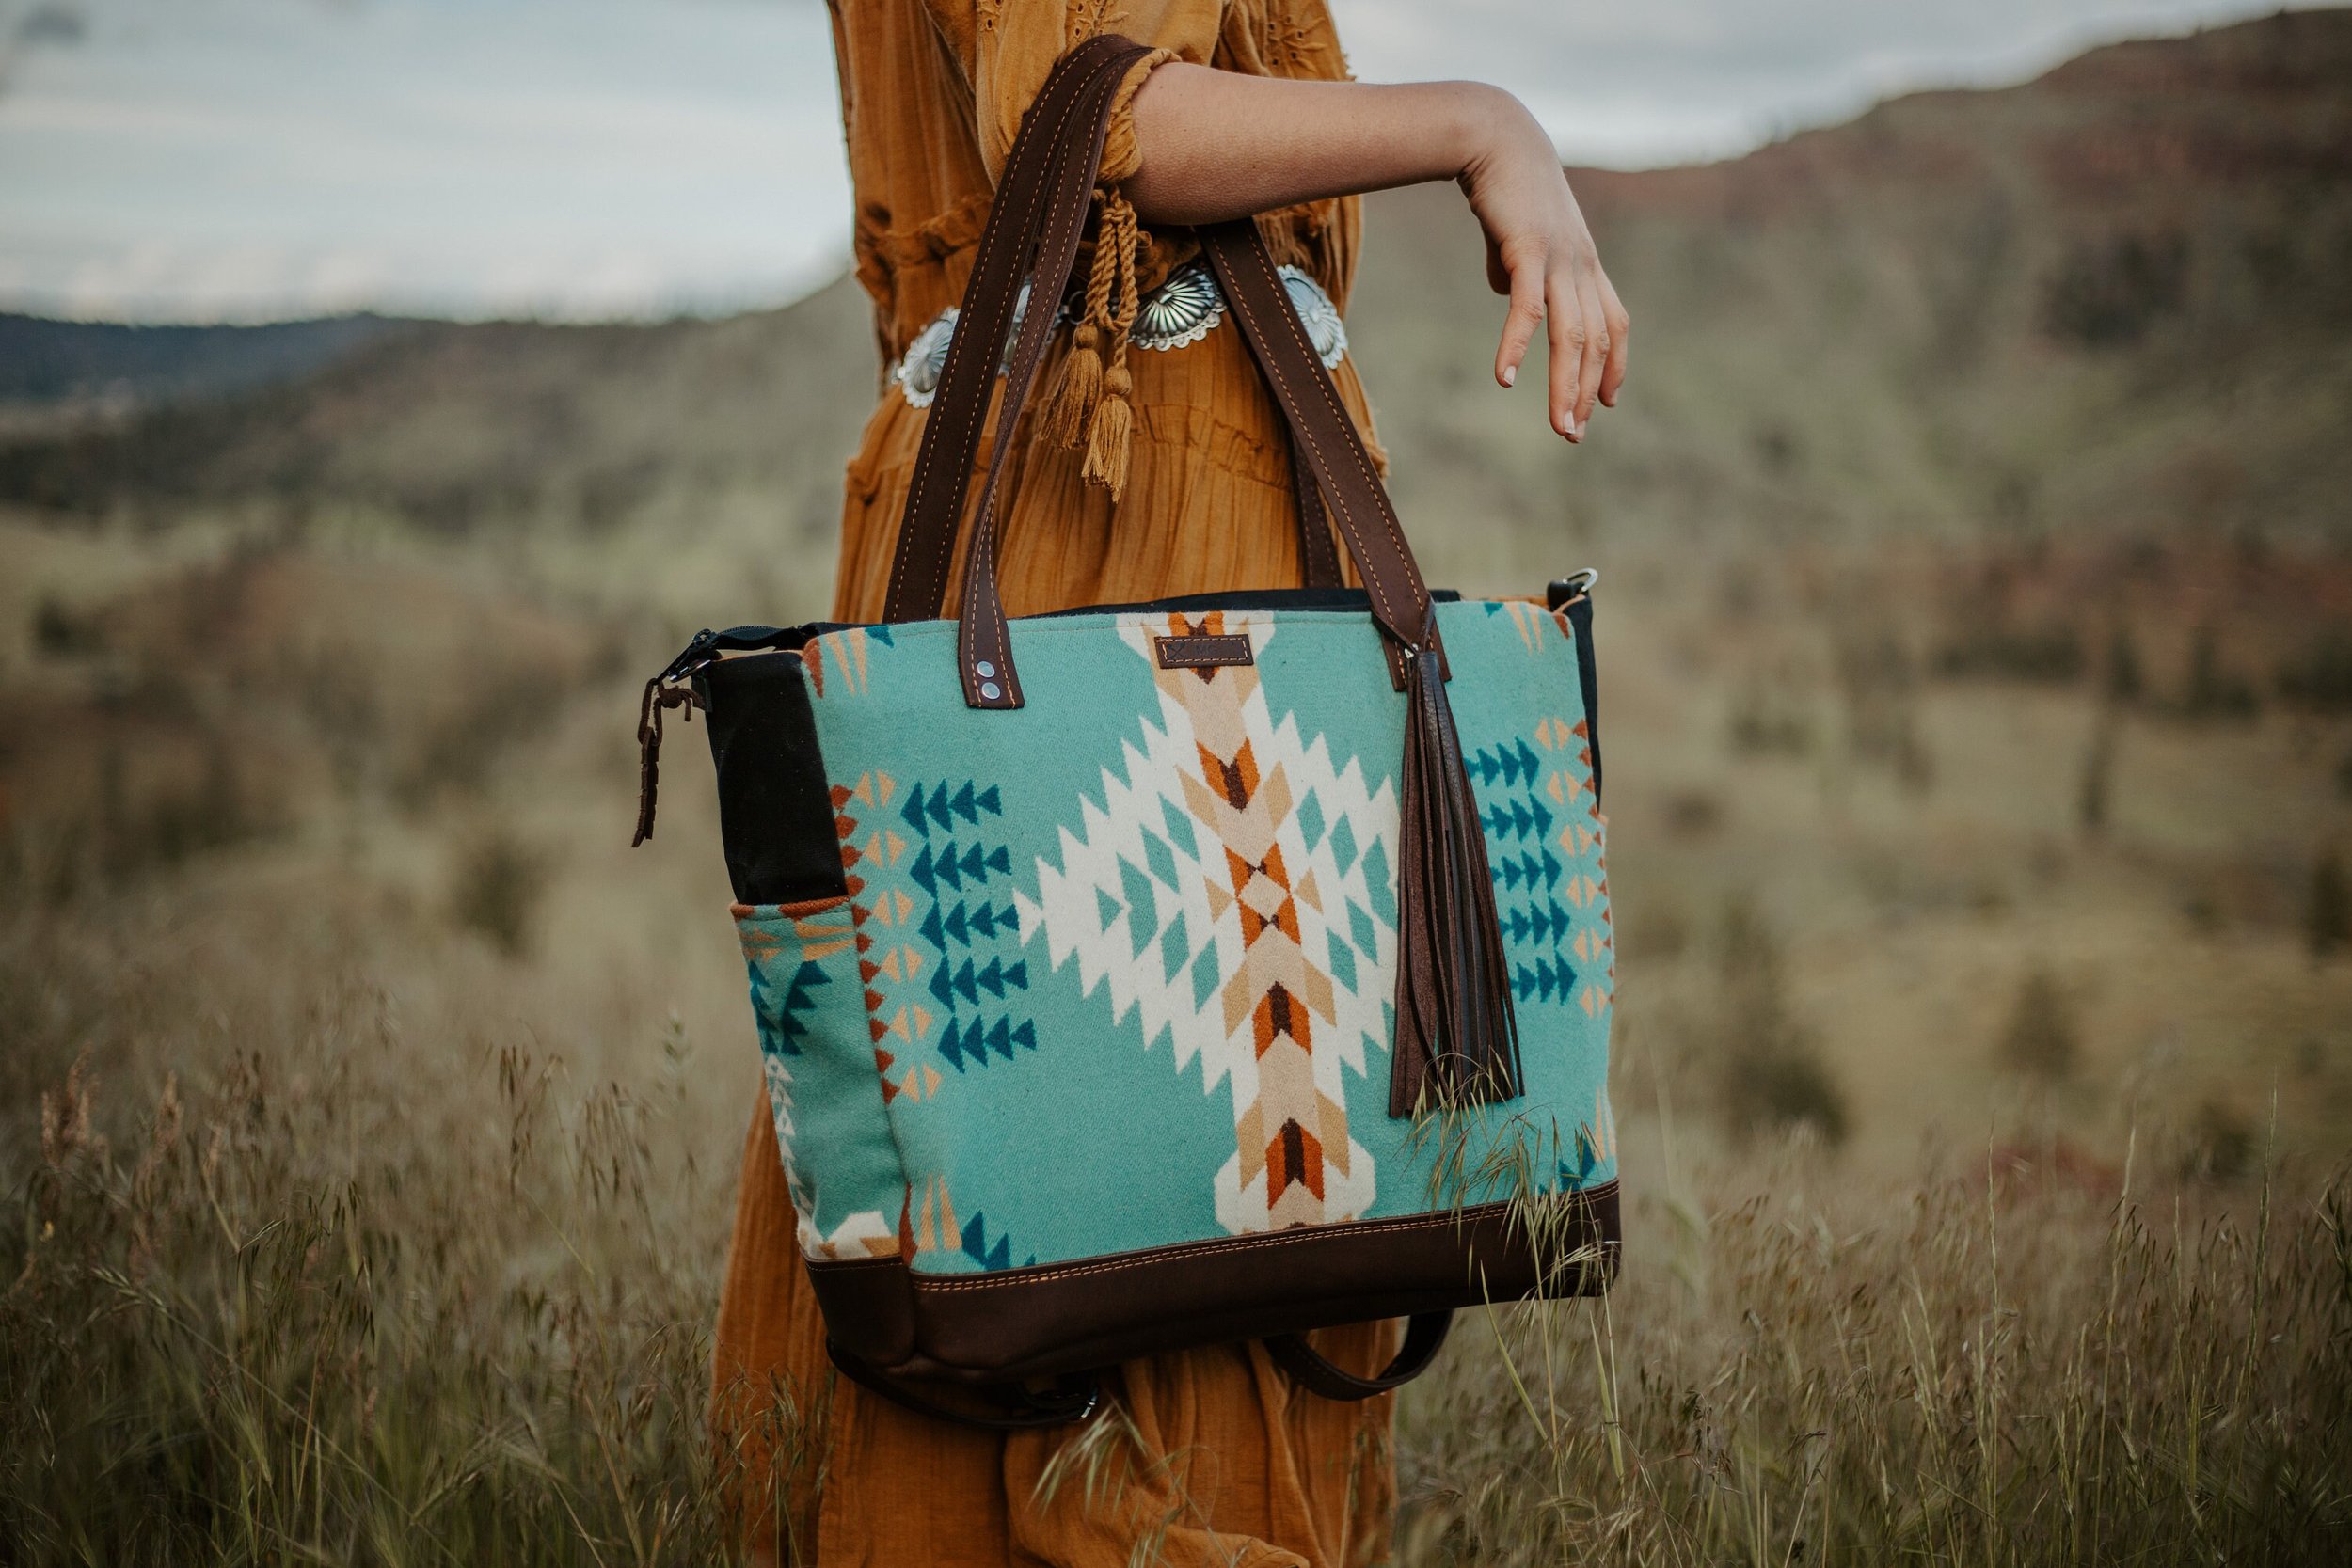 UNISEX DIAPER BAG TOTE IN LEATHER AND NATIVE WOOL, SOUTHWESTERN CARRY ...